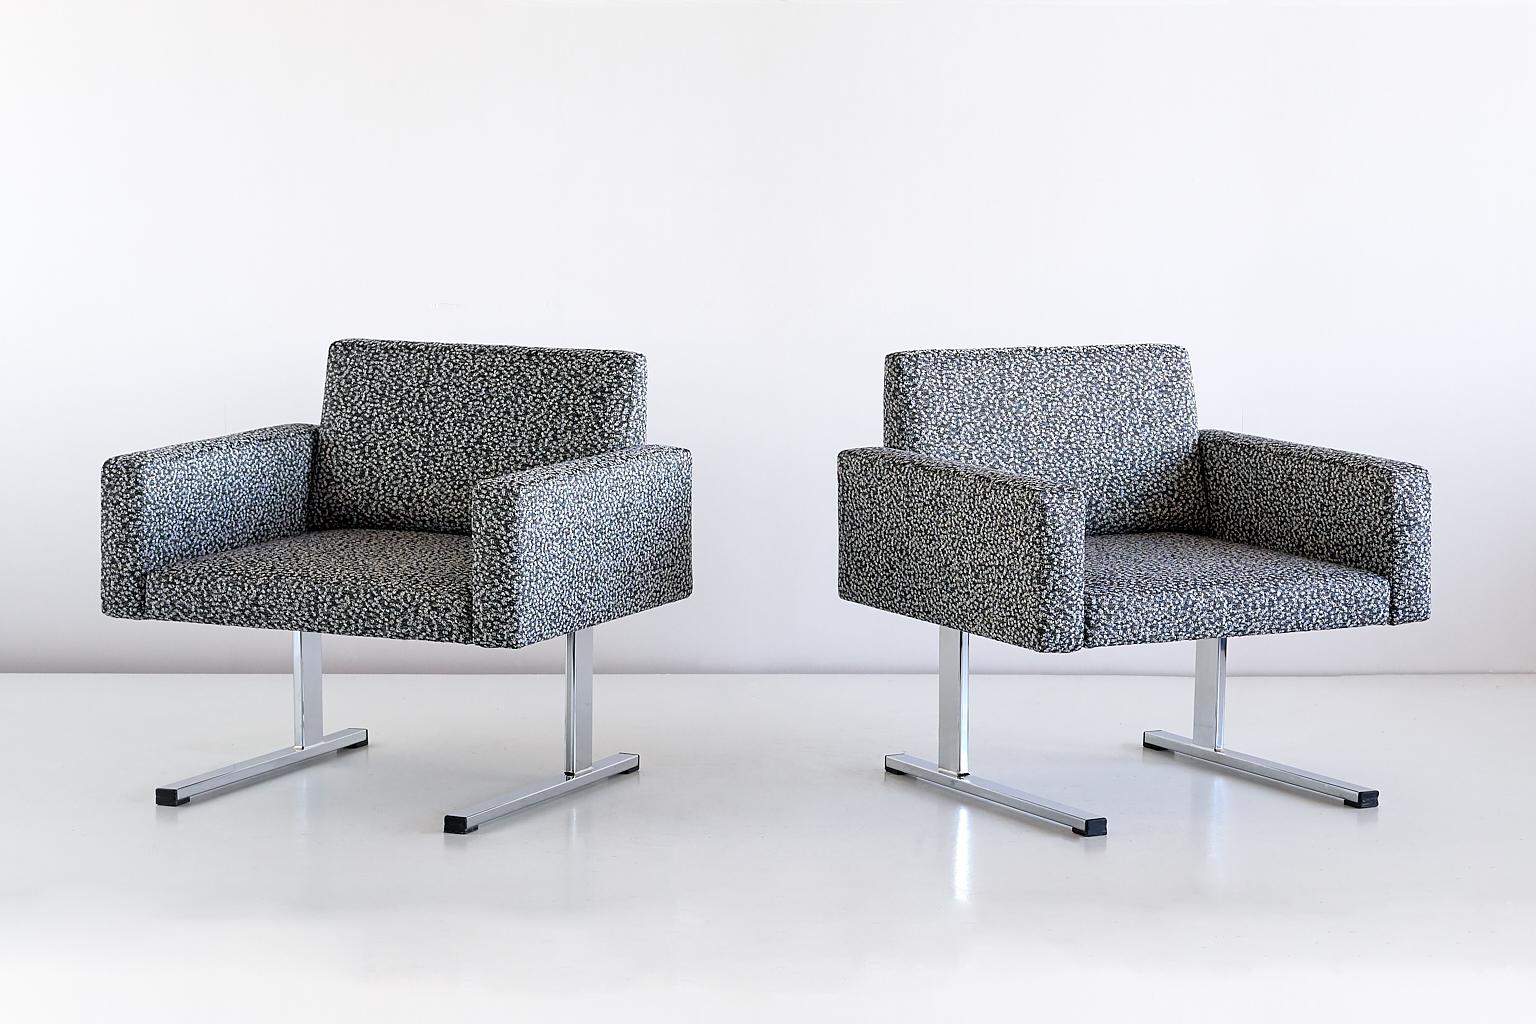 This exceptionally rare pair of lounge chairs was designed by Esko Pajamies and produced by the Finnish company Merva in the 1960s. The rectangular shape of the seat, armrests and backrest give the chair a geometric and modernist appearance. The